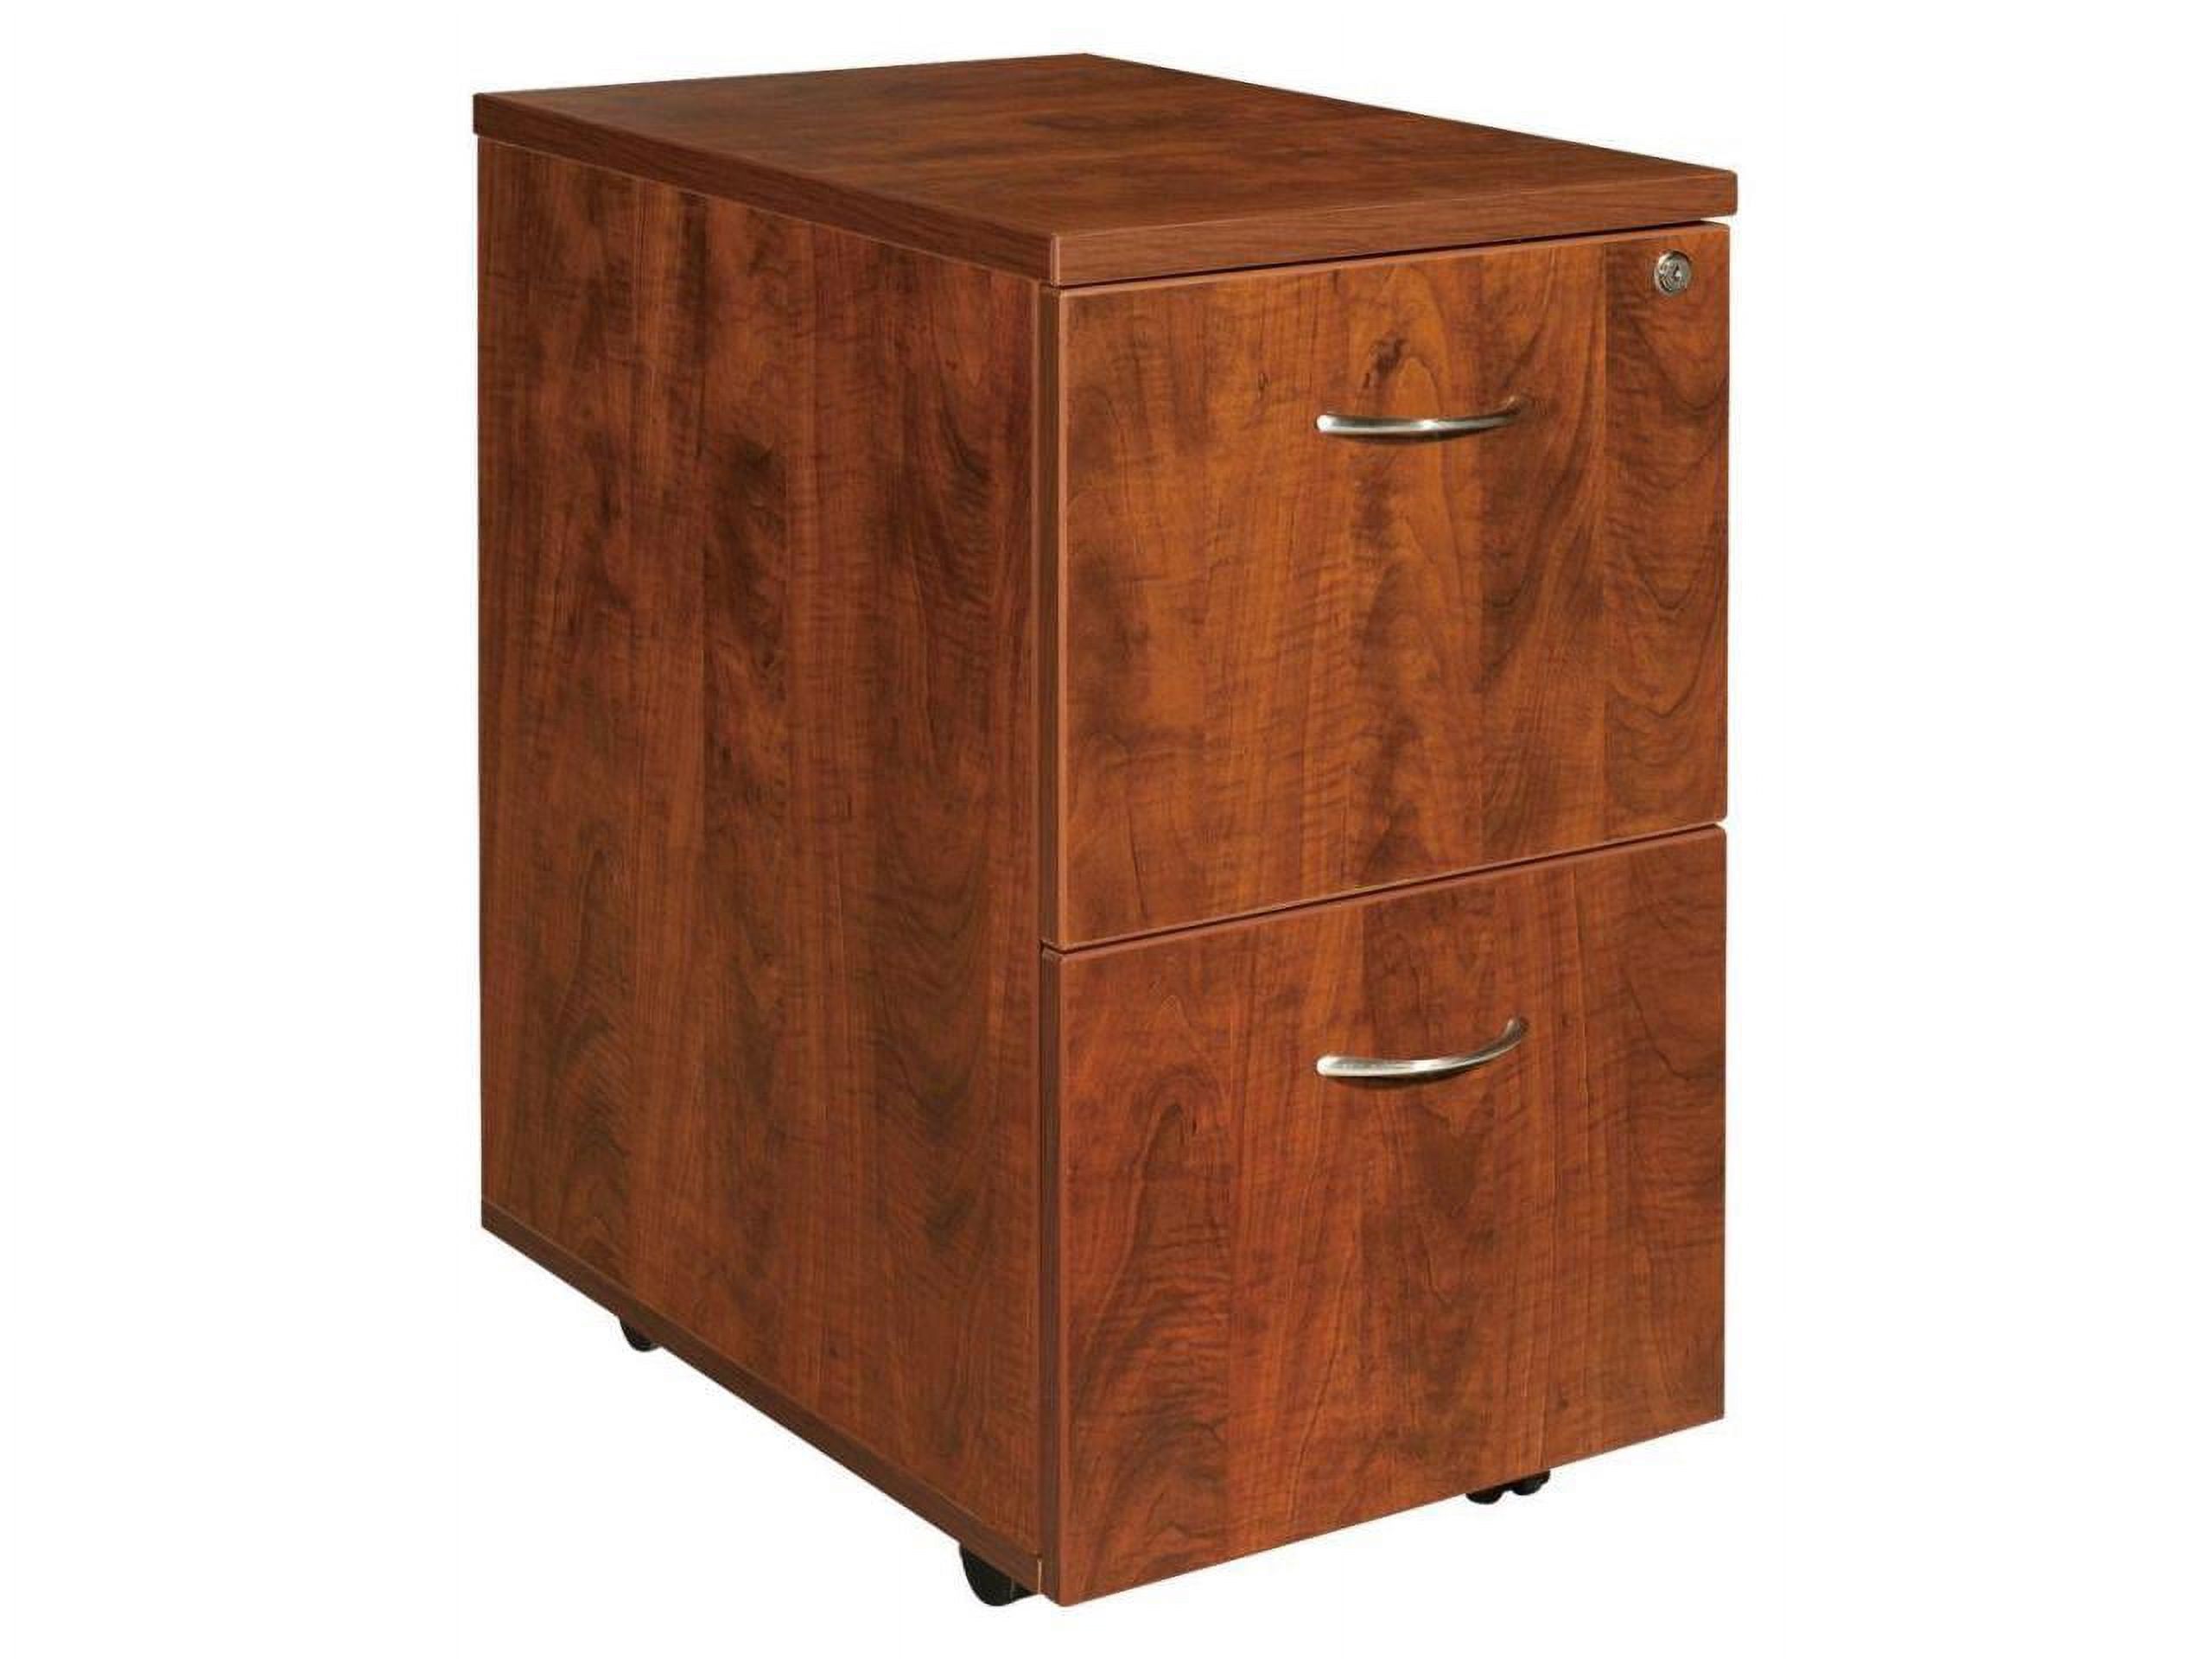 2 Drawers Vertical Wood Composite Lockable Filing Cabinet, Cherry, Letter-Size - image 5 of 14